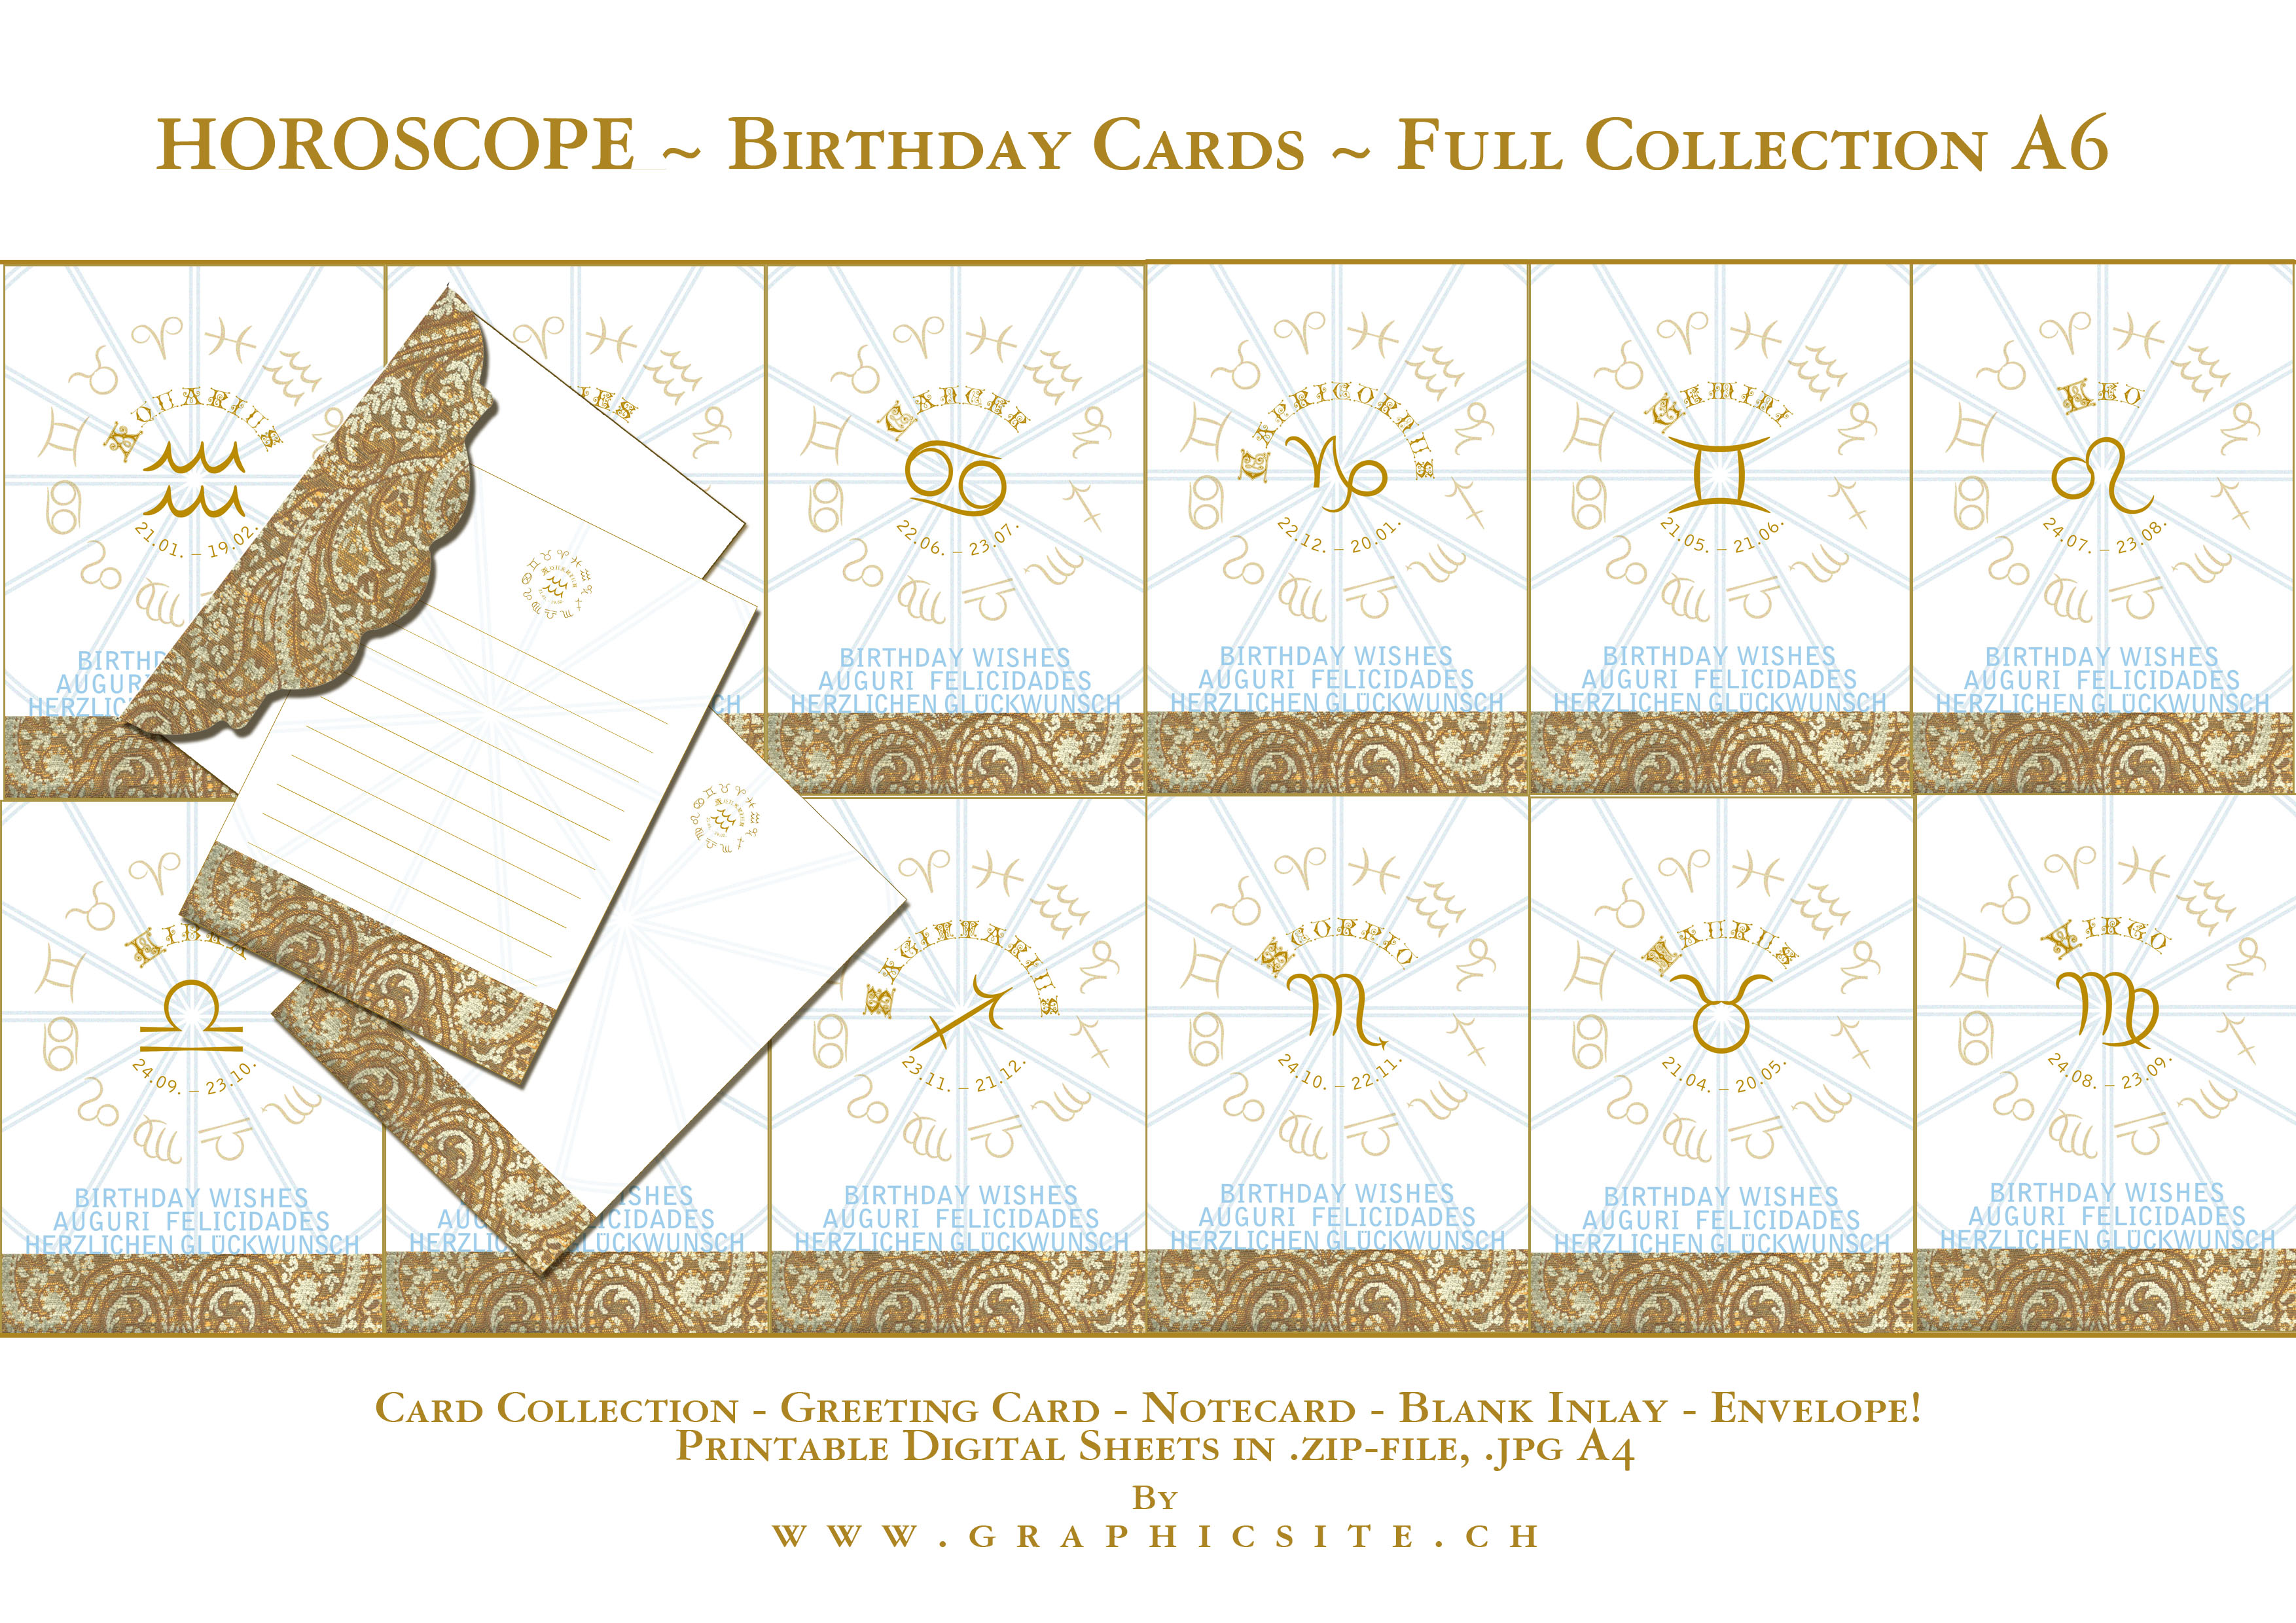 Printable Digital Sheets - Birthday Card Collection - Horoscope - Zodiac - Full Collection - A6 - GraphicDesign, Luzern